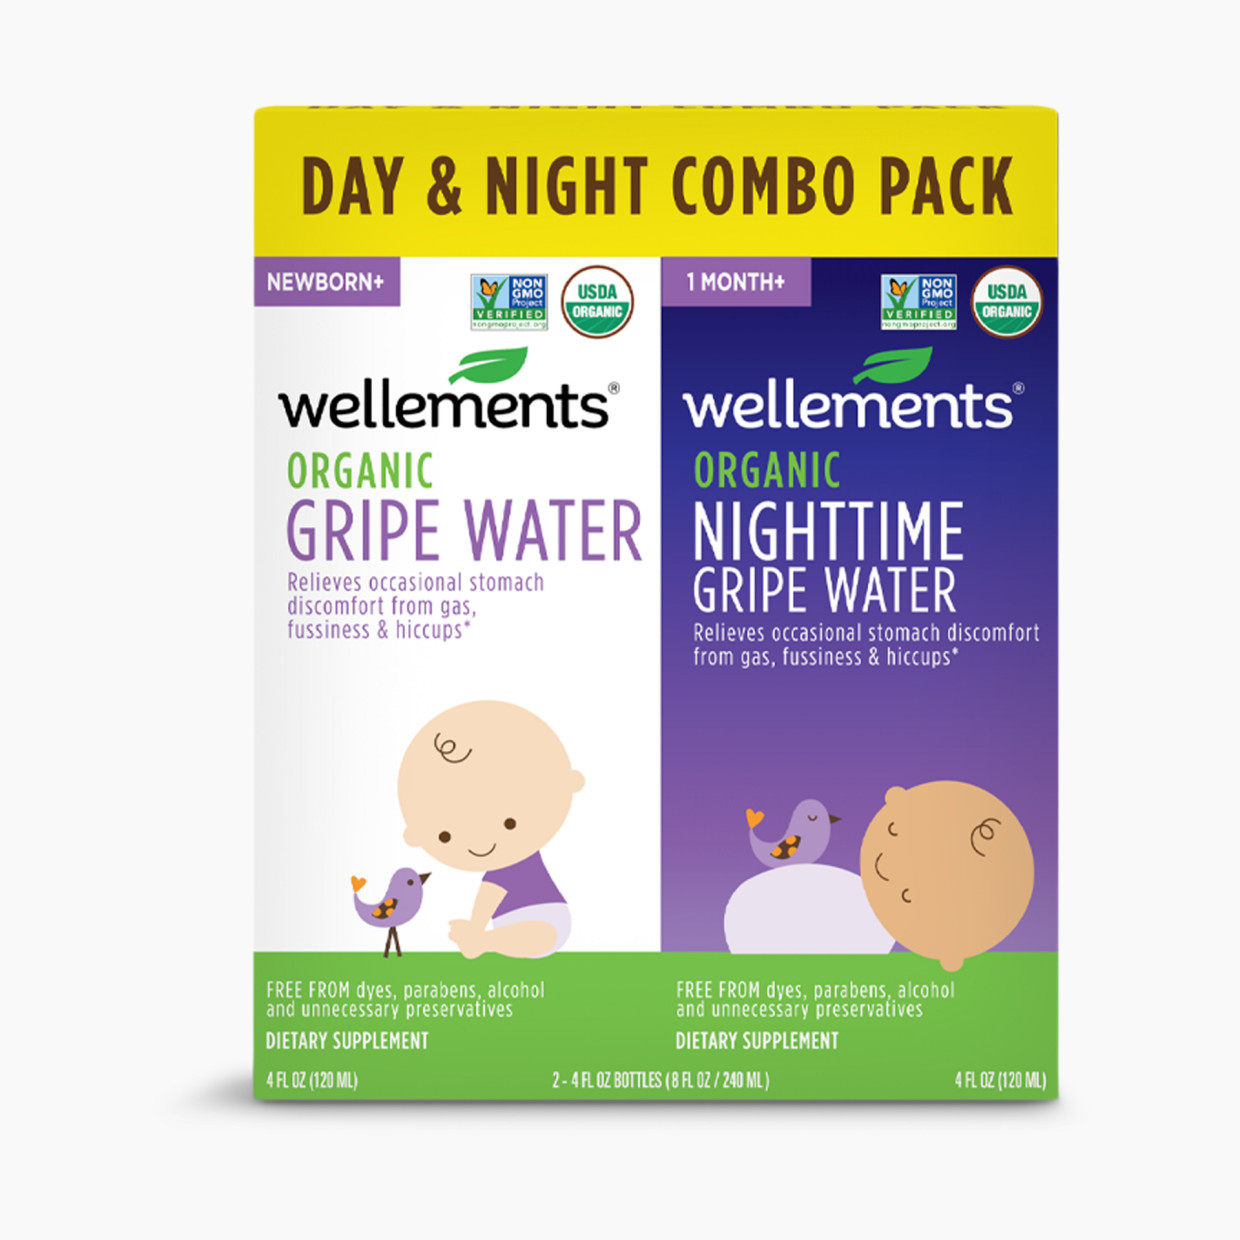 Wellements Organic Gripe Water Day/ Night Combo Pack.